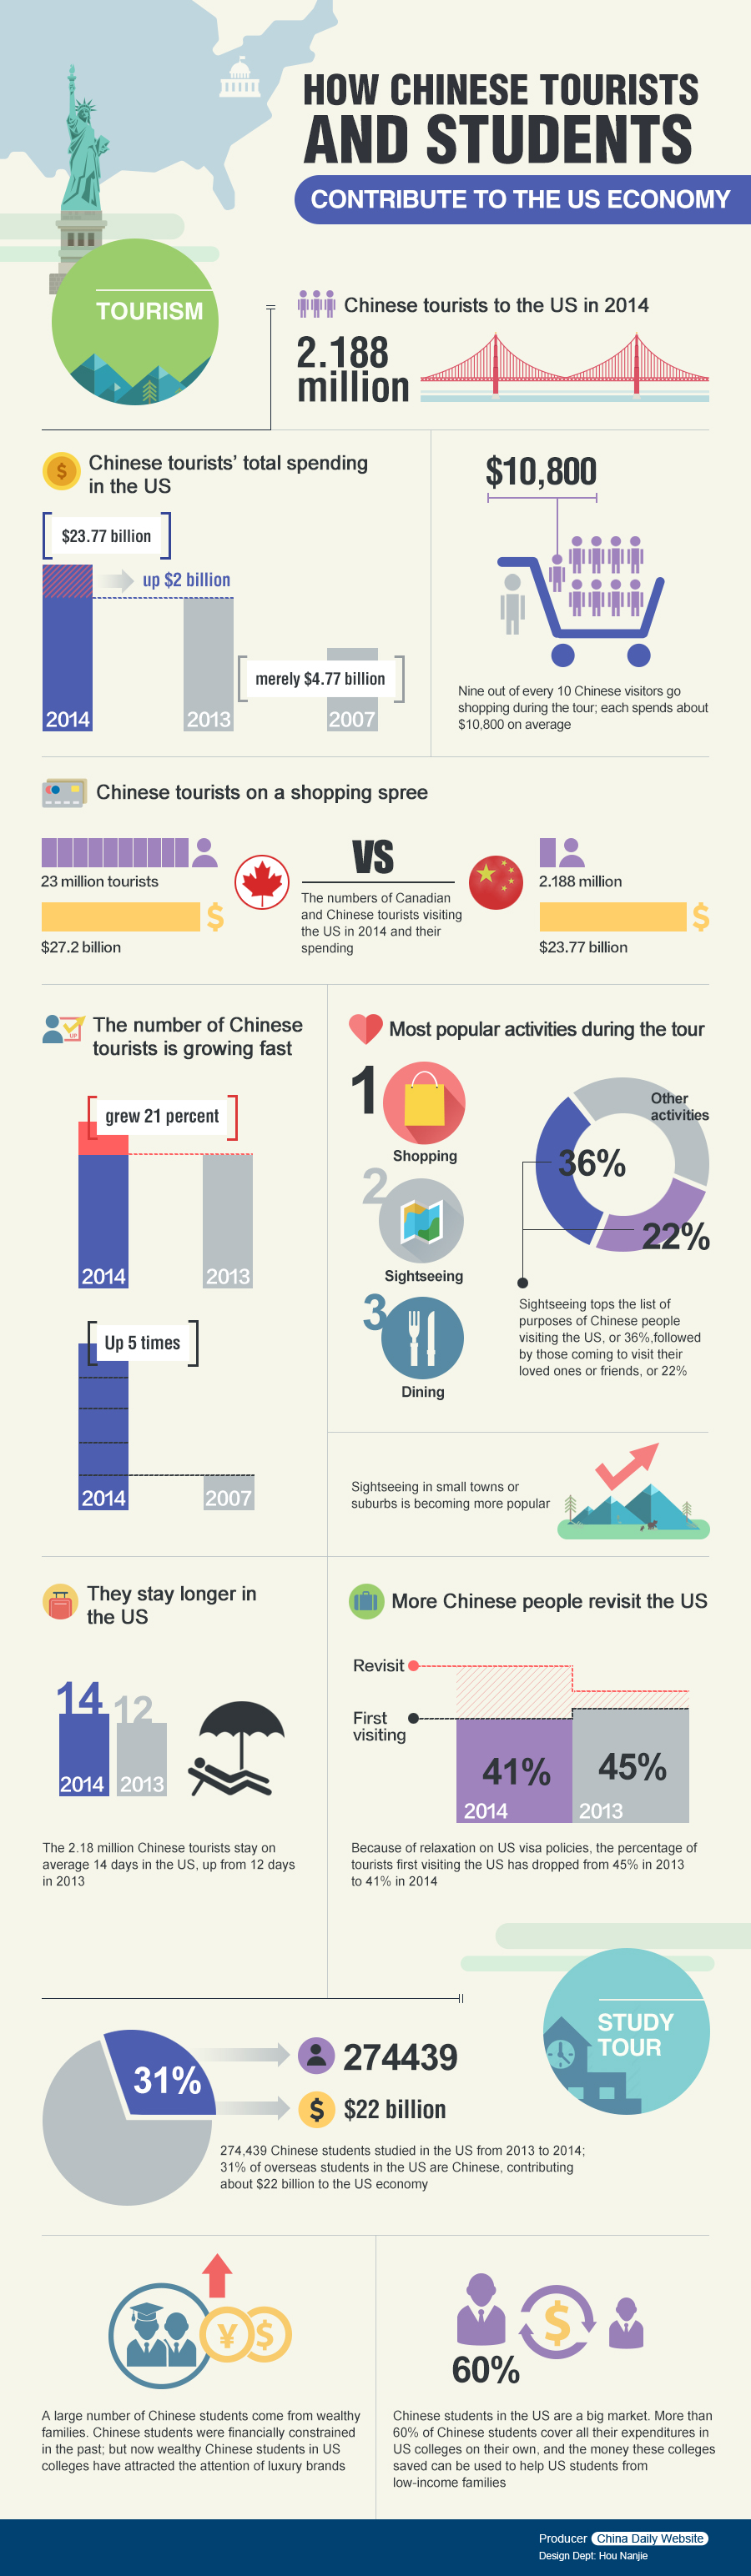 How Chinese tourists and students contribute to the US economy